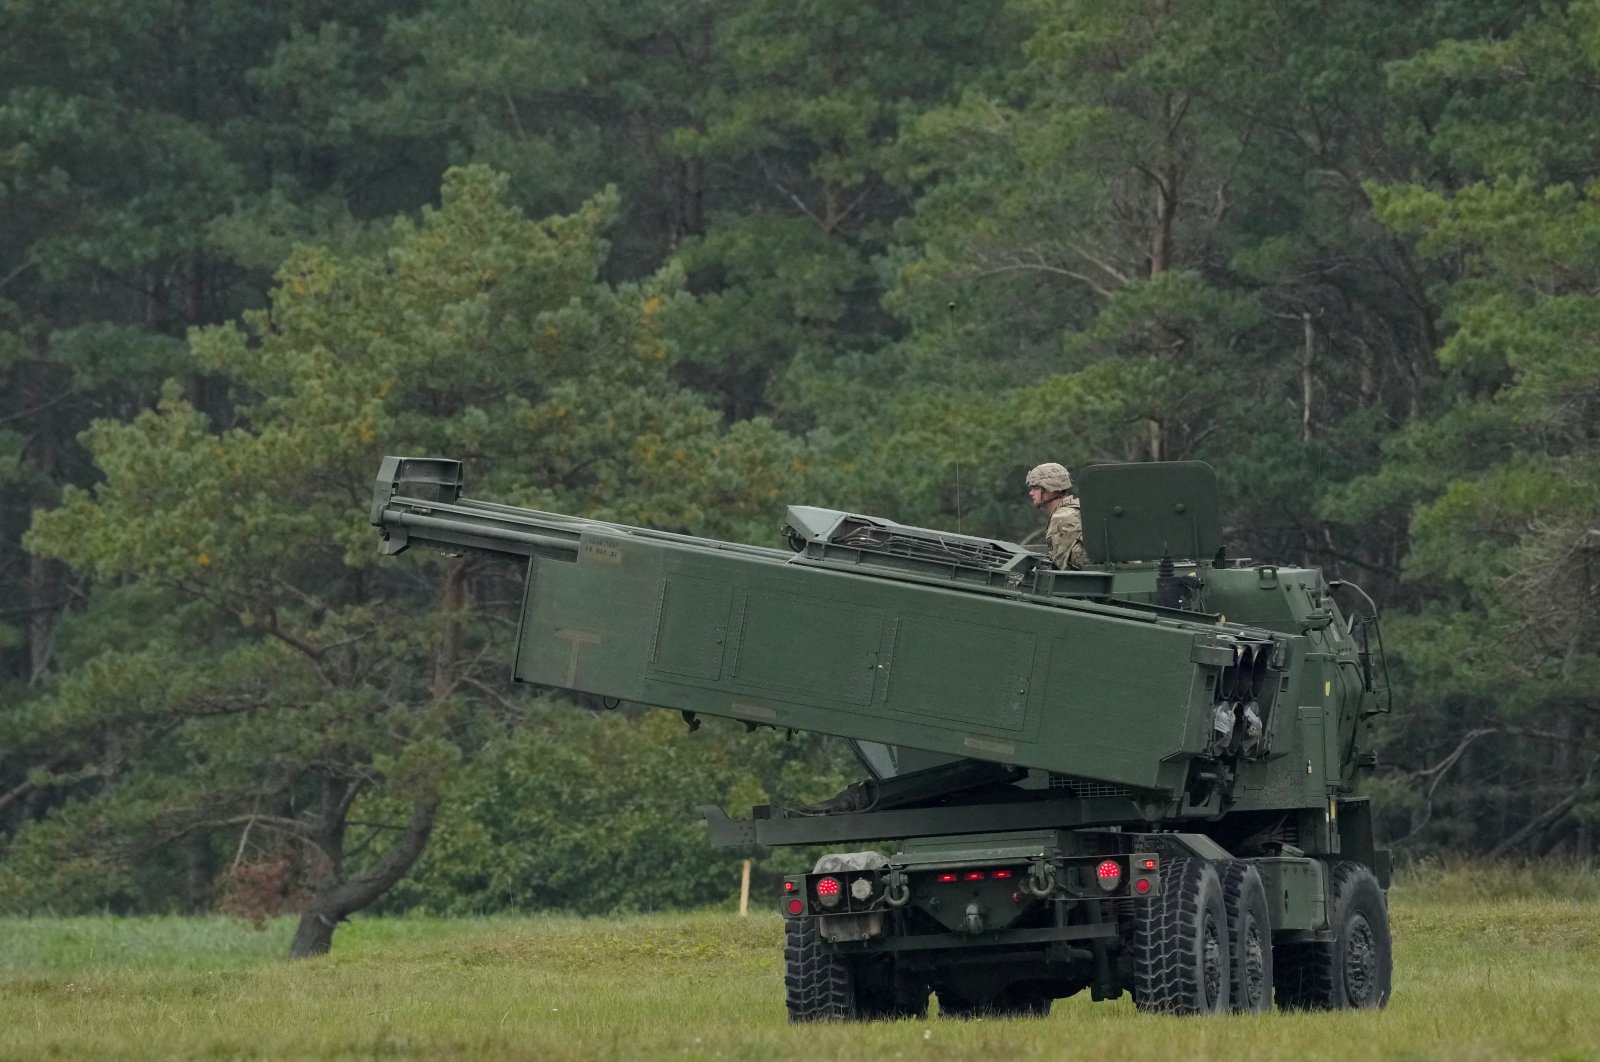 An M142 High Mobility Artillery Rocket System (HIMARS) takes part in a military exercise near Liepaja, Latvia, Sept. 26, 2022. (Reuters Photo)